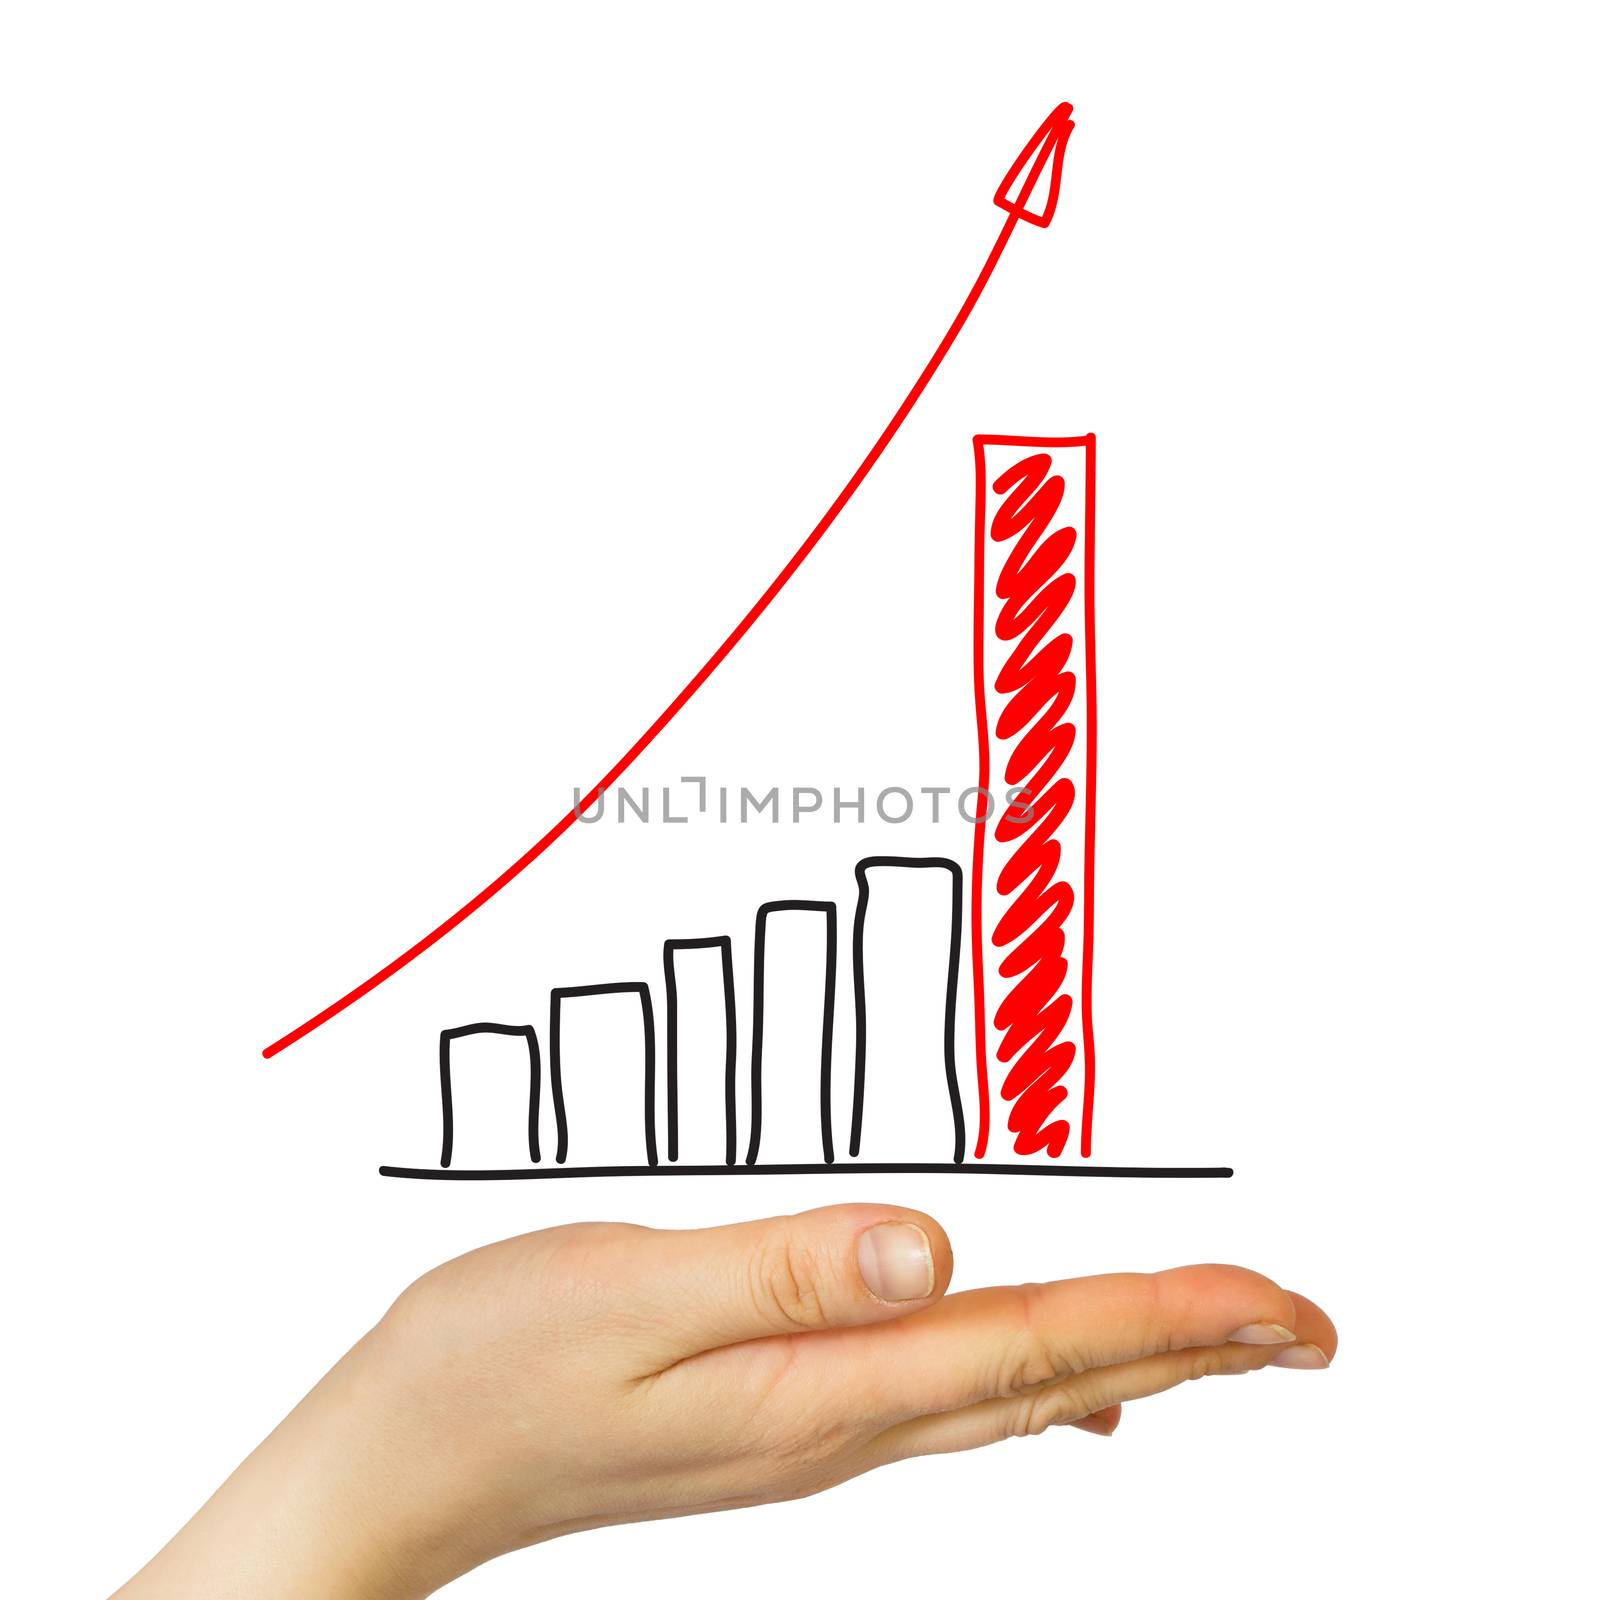 On the palm of the hand is a growth graph by cherezoff